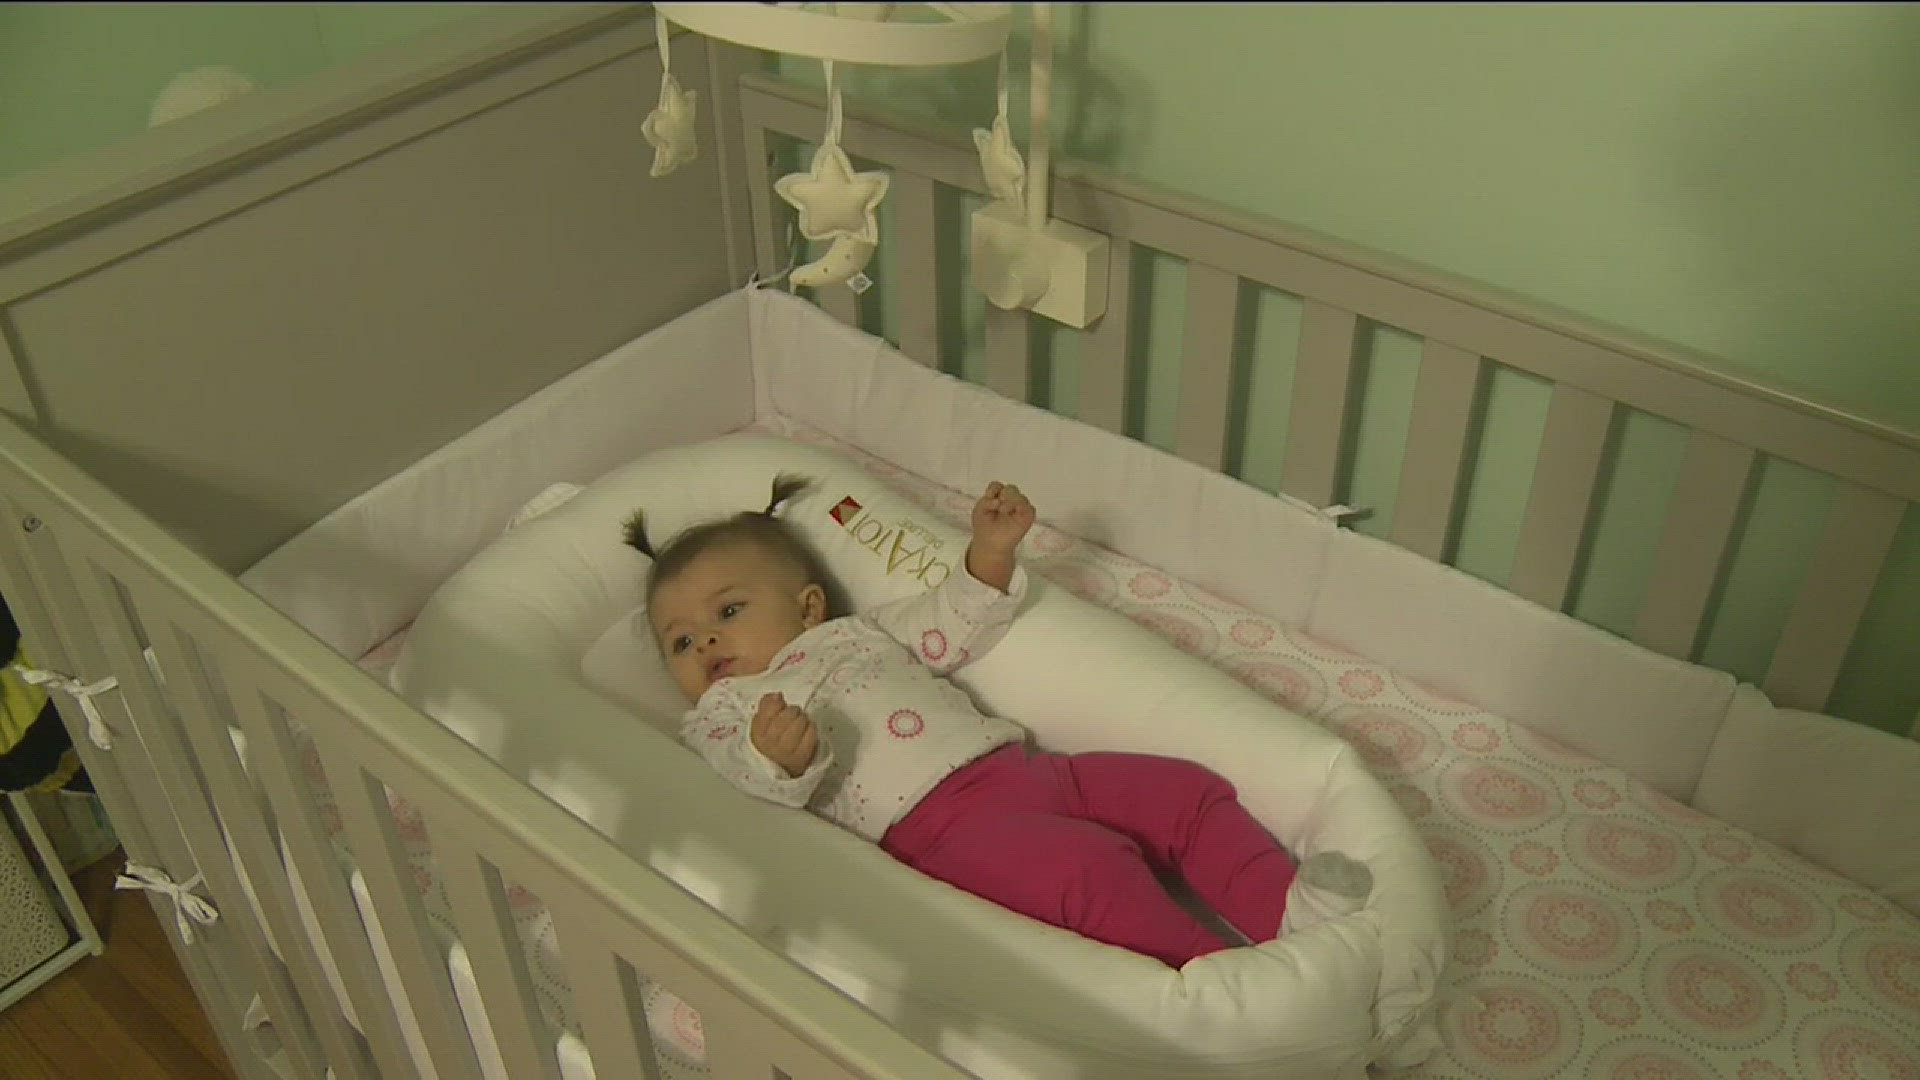 When it comes to how your baby sleeps, a report by the American Academy of Pediatrics says "room-sharing" with babies lowers of the risk of Sudden Infant Death Syndrome by as much as 50 percent. A Sac State professor with a background in pediatric nursing